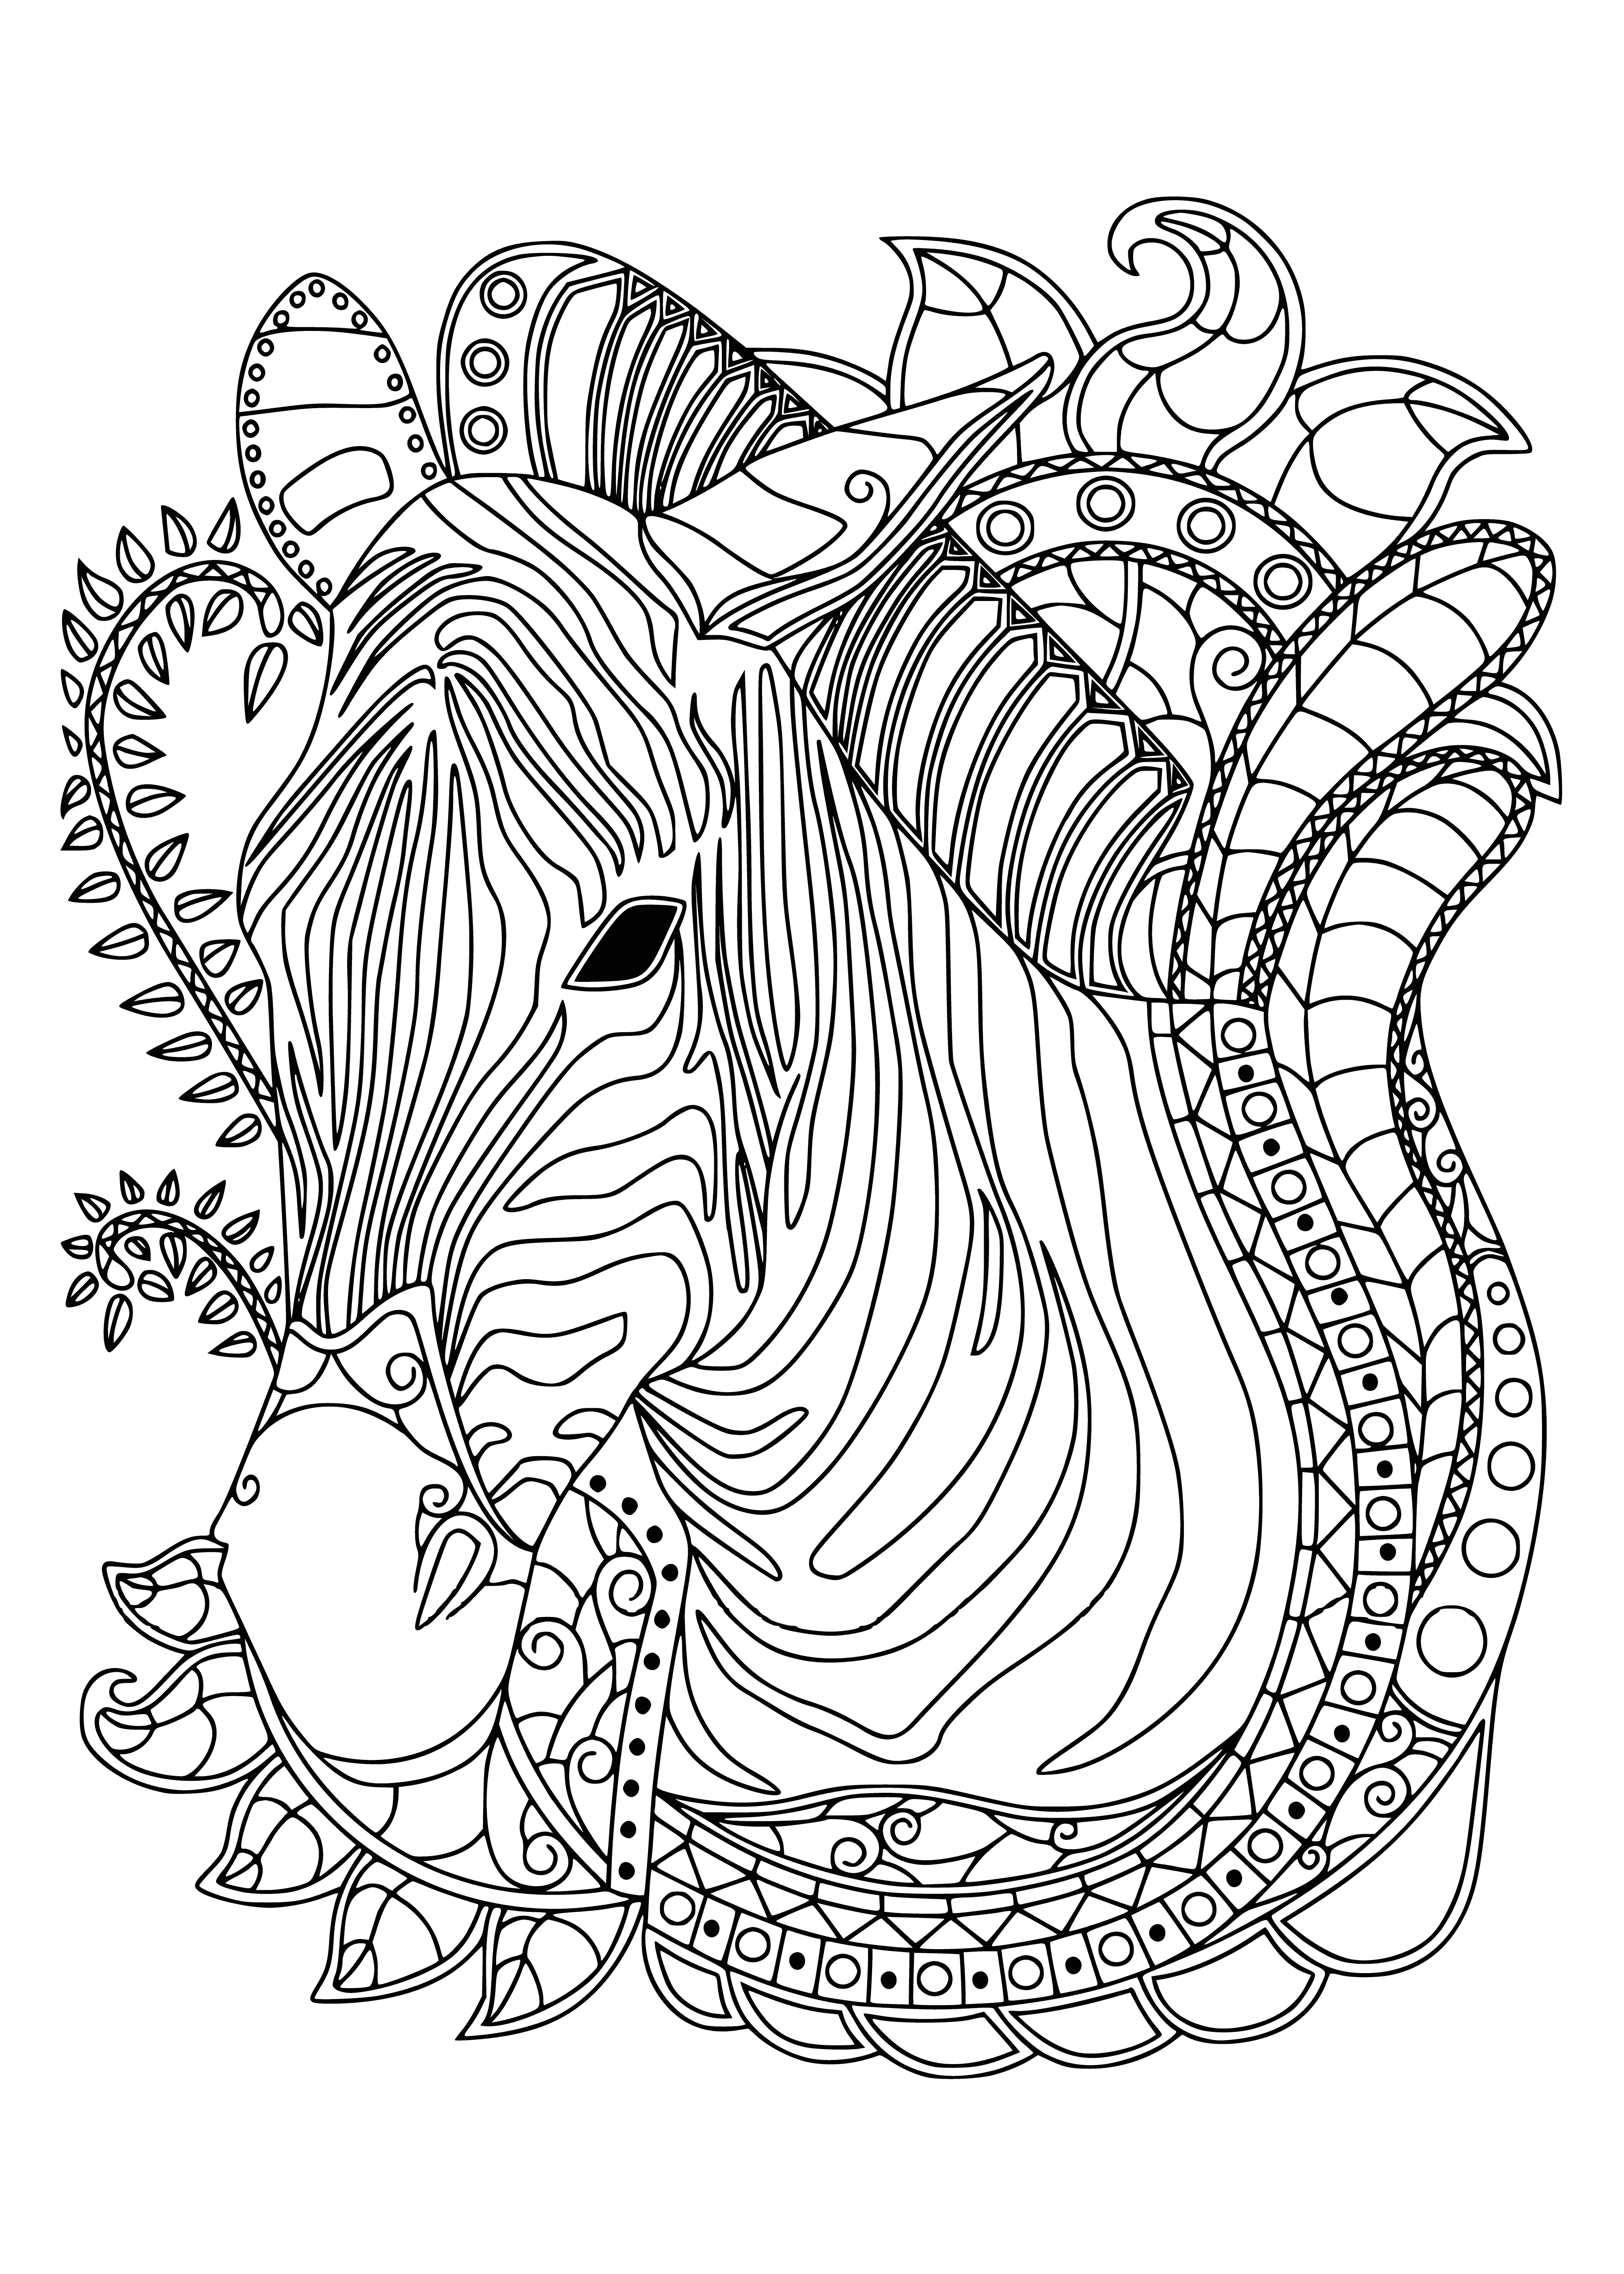 coloring page: A zebra munches grass in a field, its black and white stripes creating a beautiful sight.